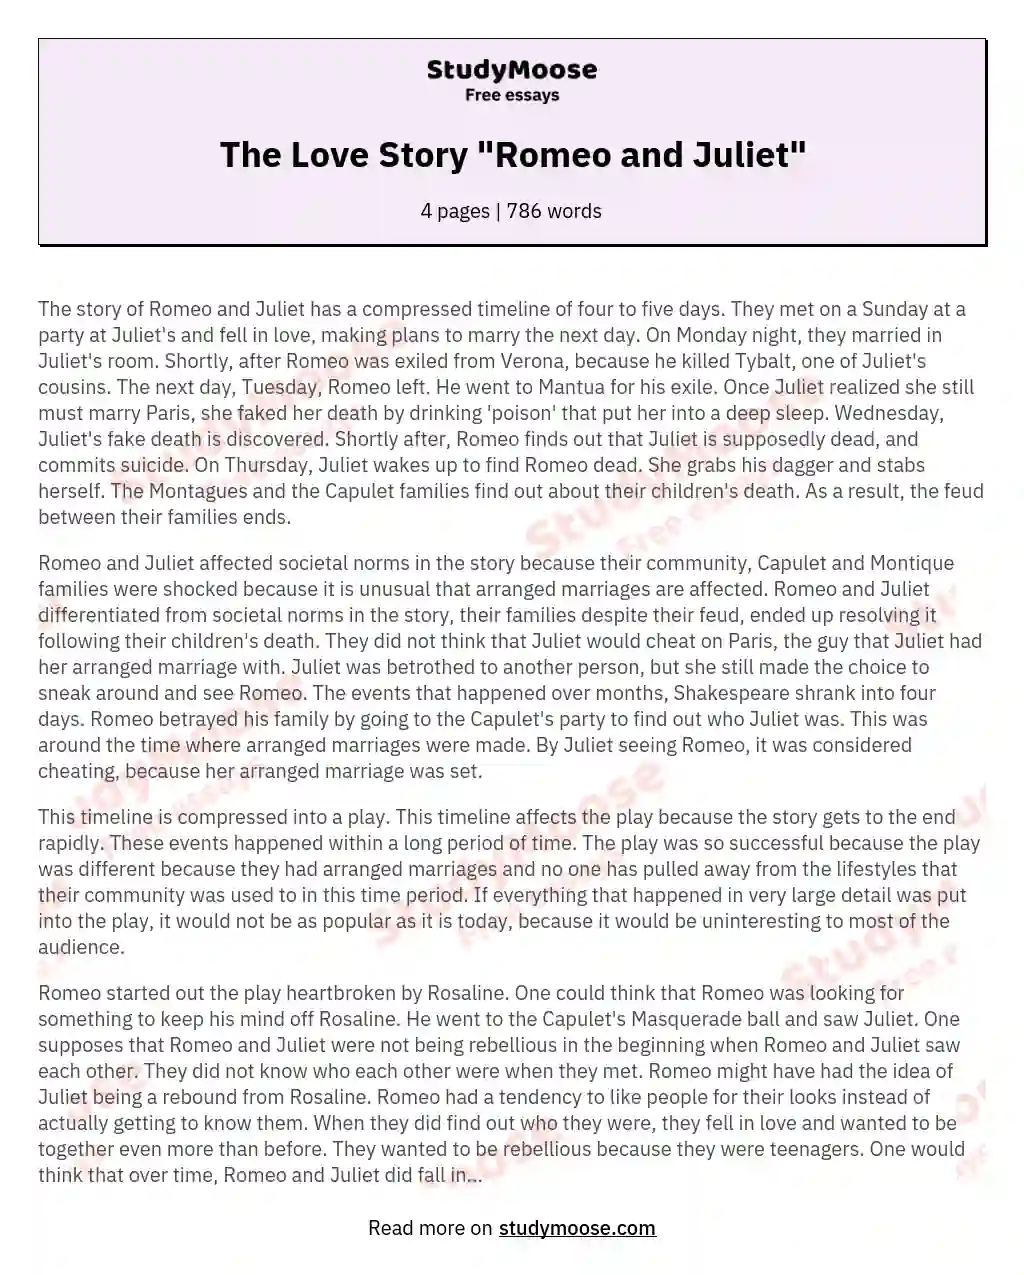 The Love Story "Romeo and Juliet"